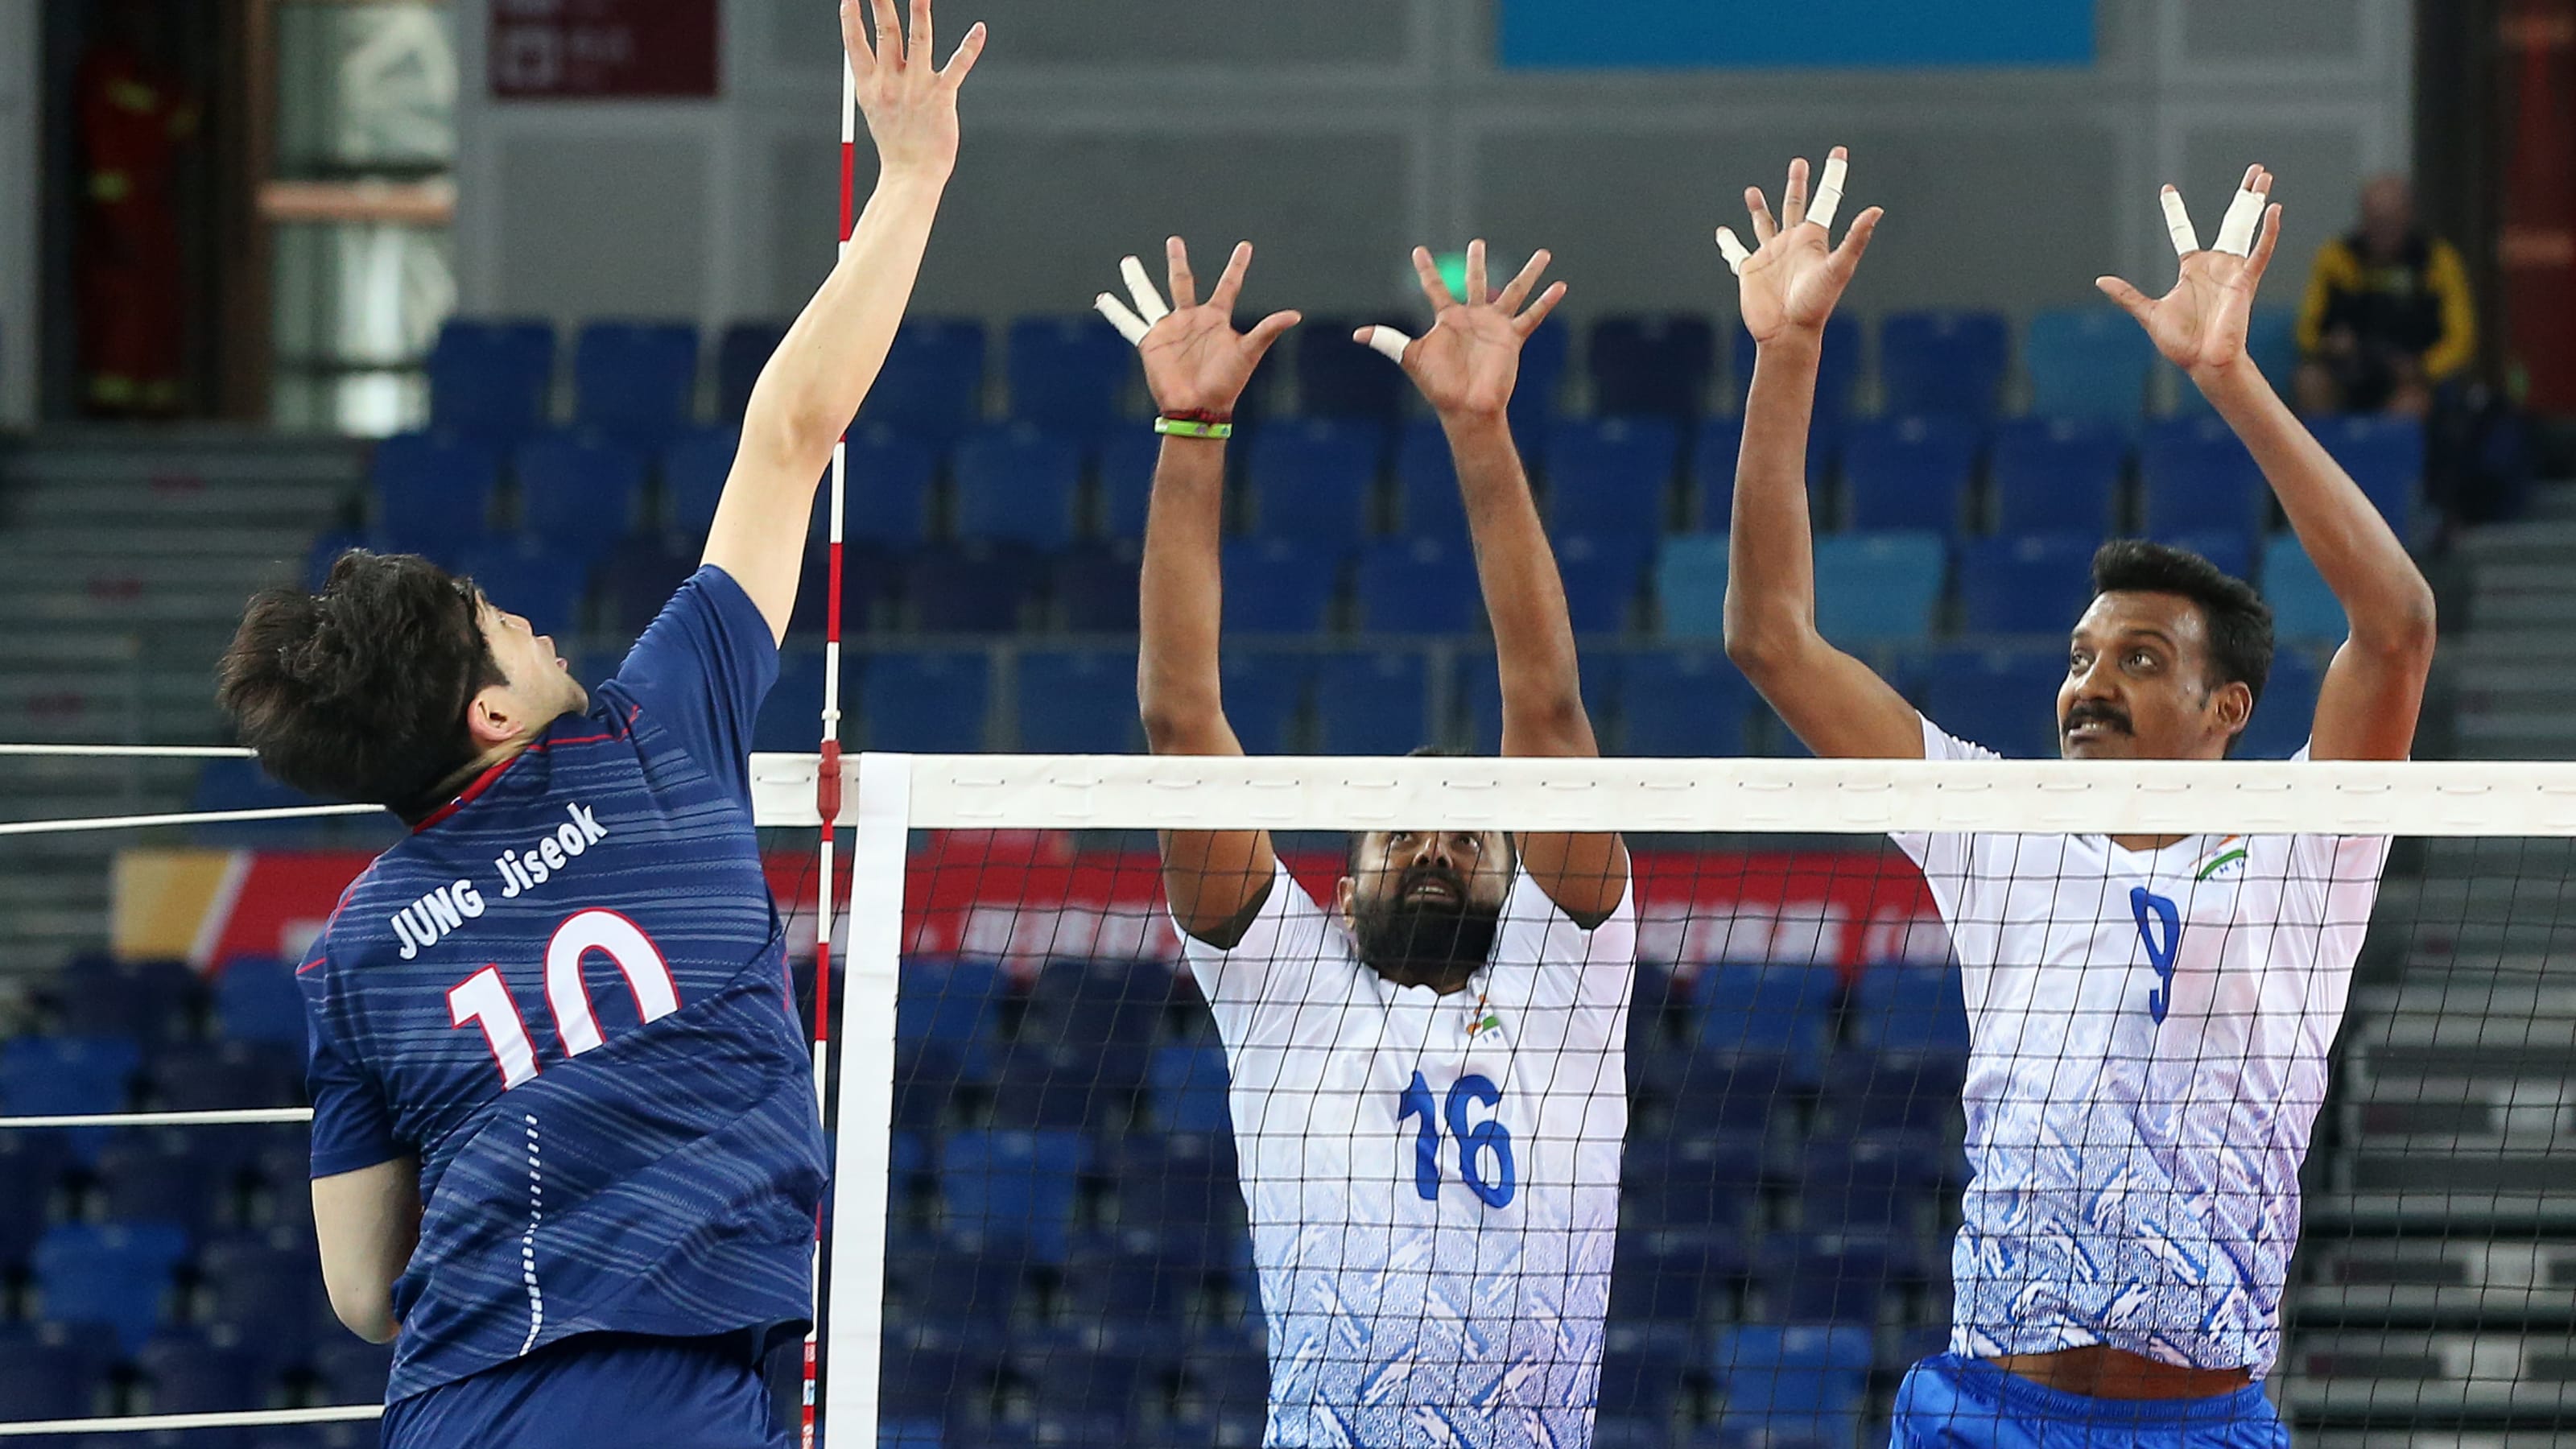 how many volleyball teams are there in the olympic games